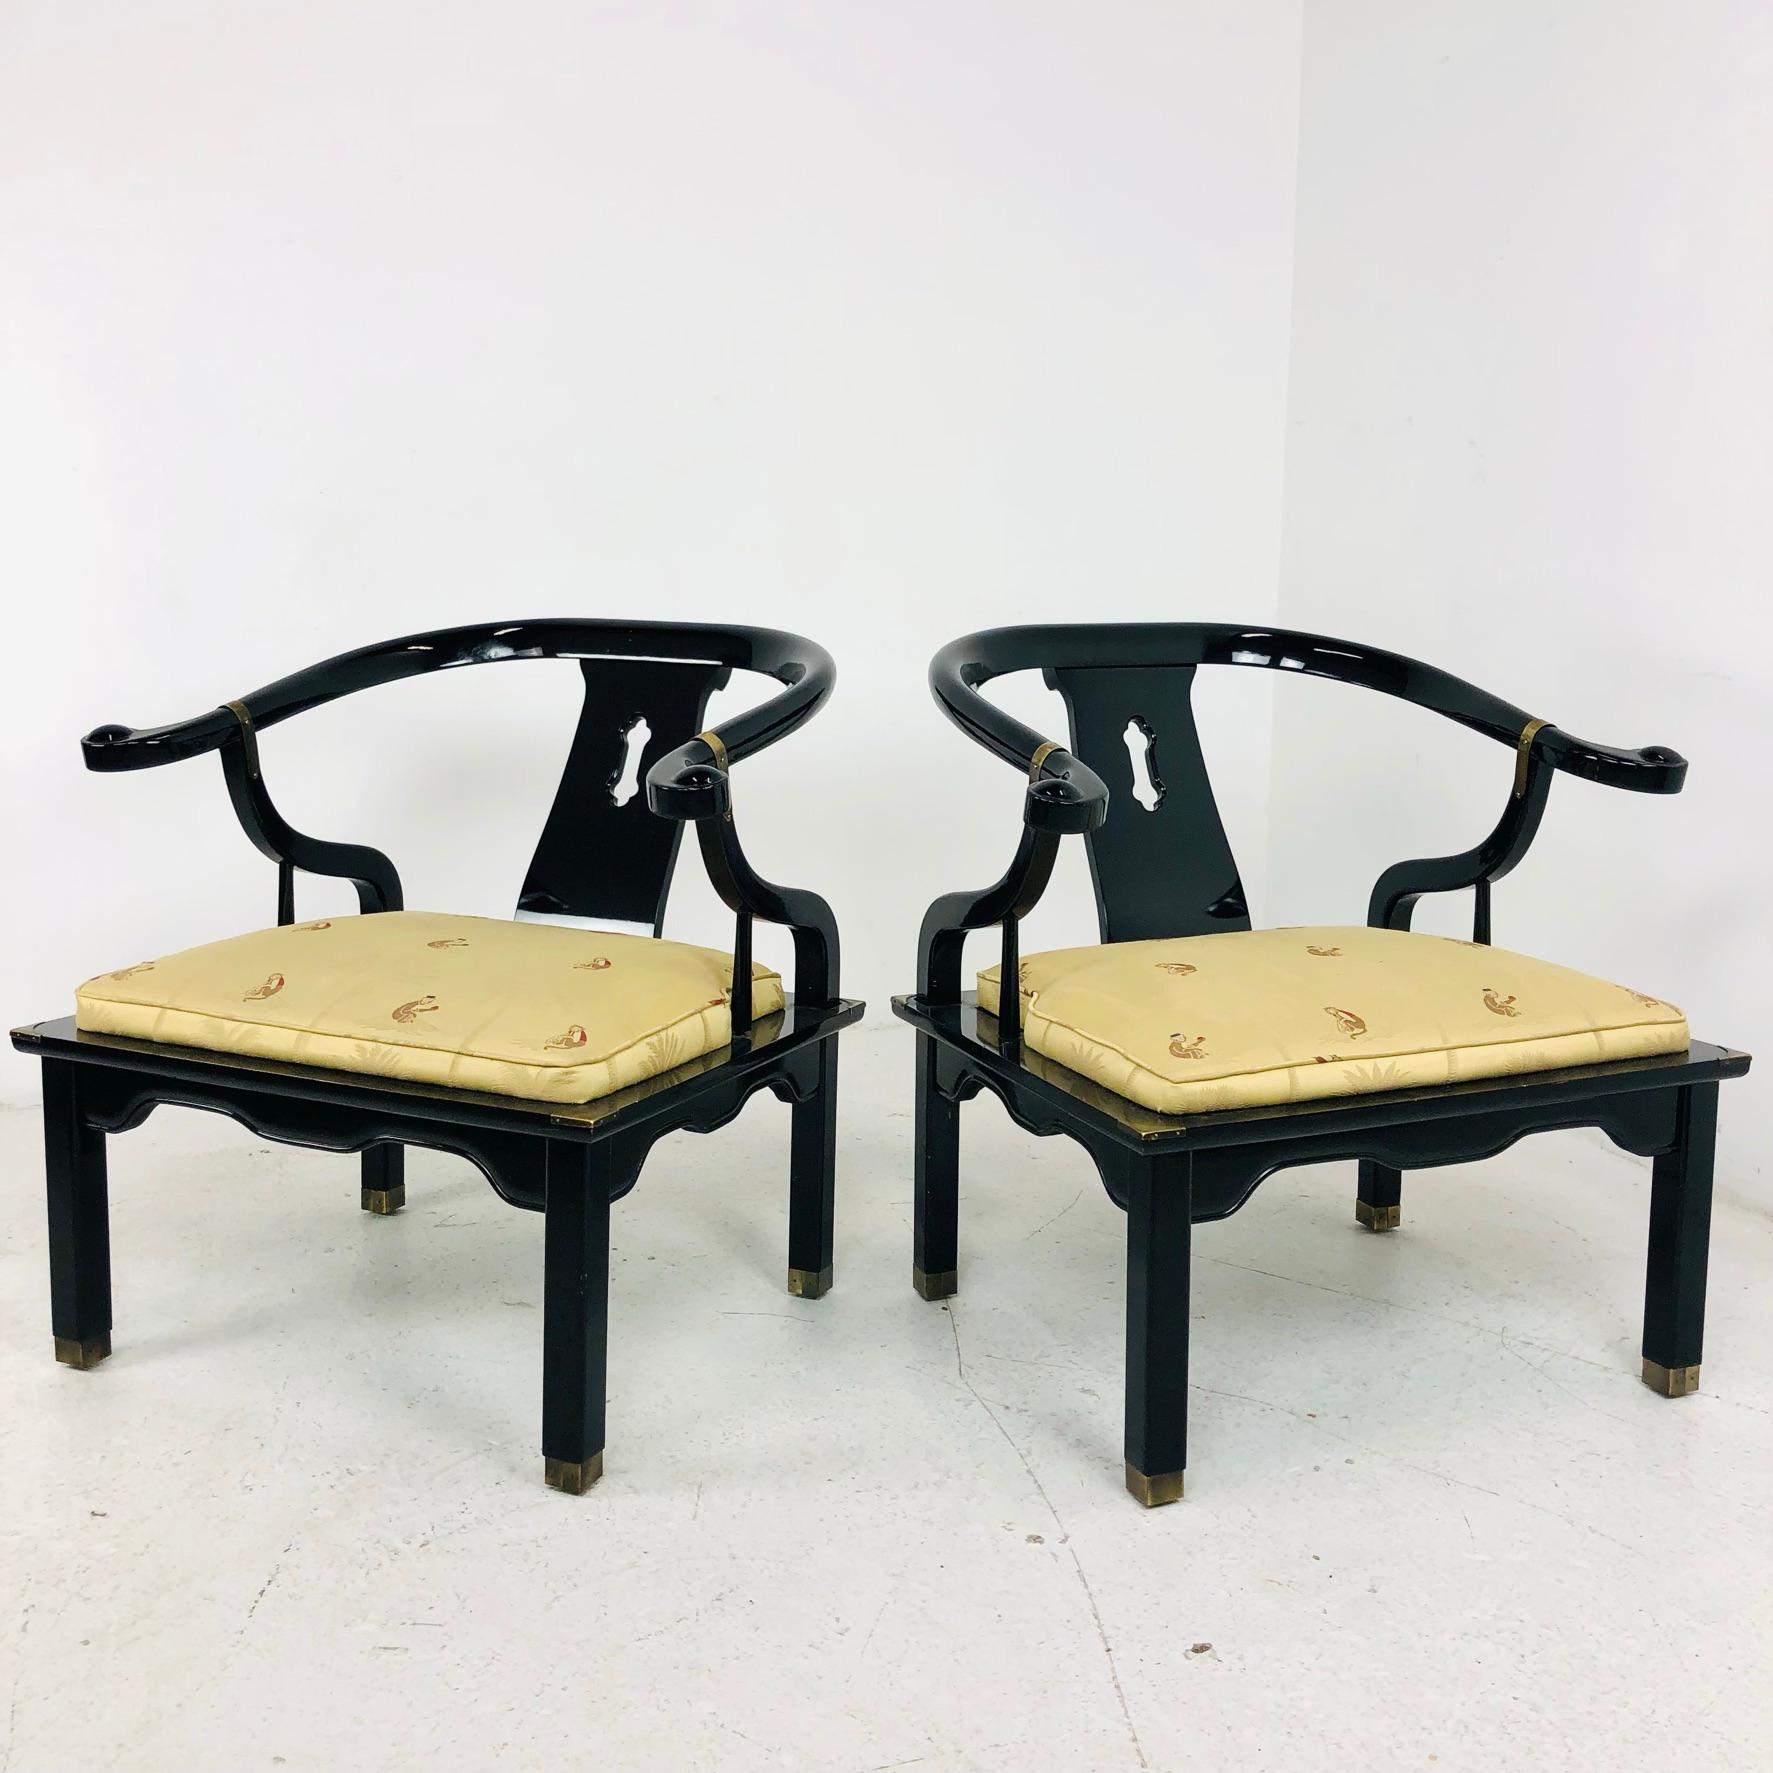 Pair of James Mont horseshoe Ming style armchairs. Features solid wood construction and beautiful high gloss finish. Circa mid-20th century.